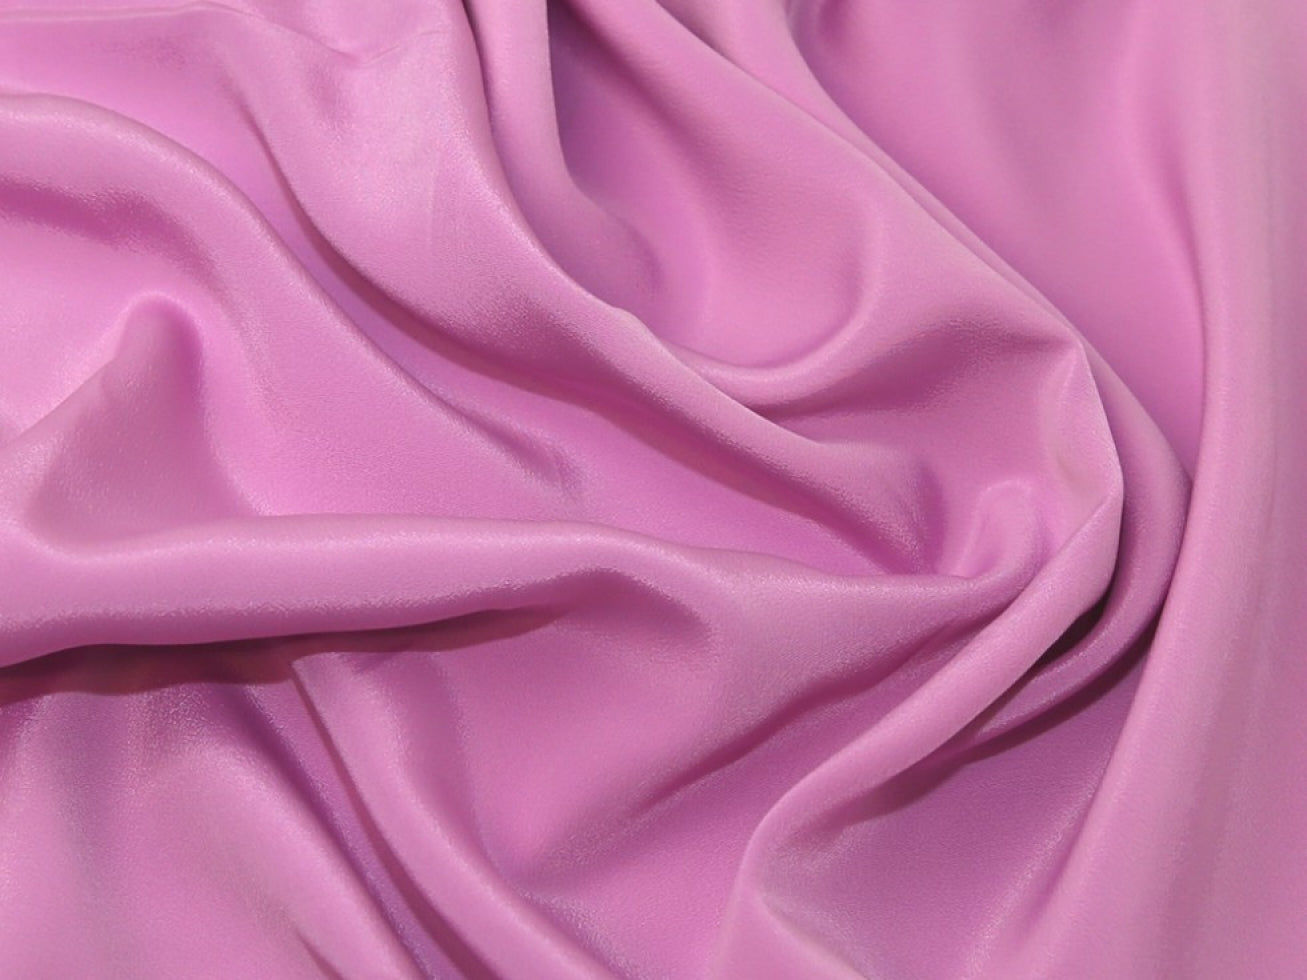 Darbari Smooth Light And Feel Like Feather On Skin Crepe De Chine Fabric- Candy Pink